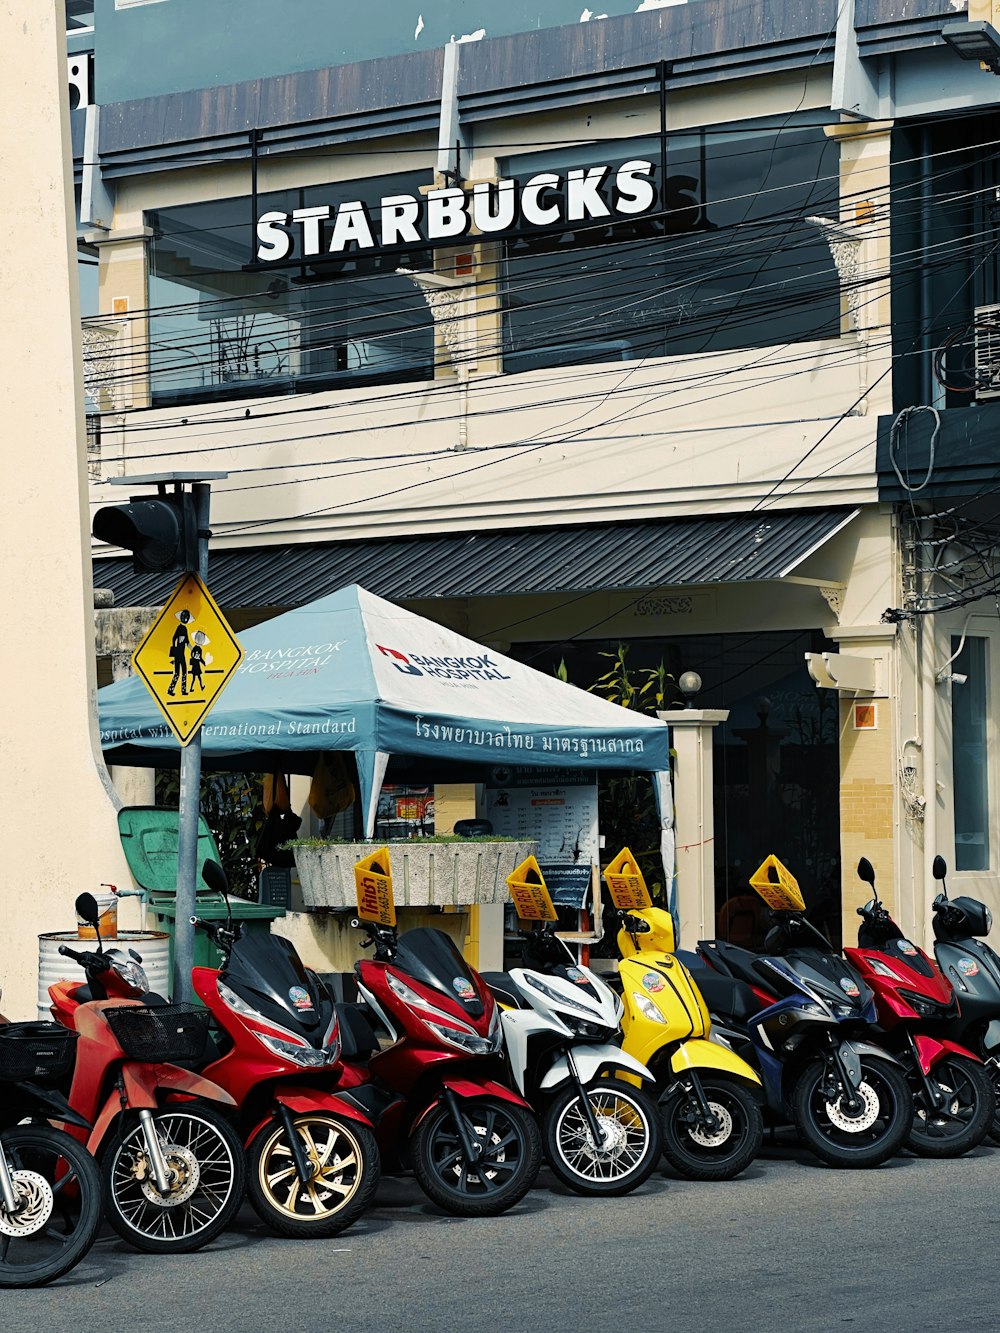 a row of motorcycles parked in front of a store